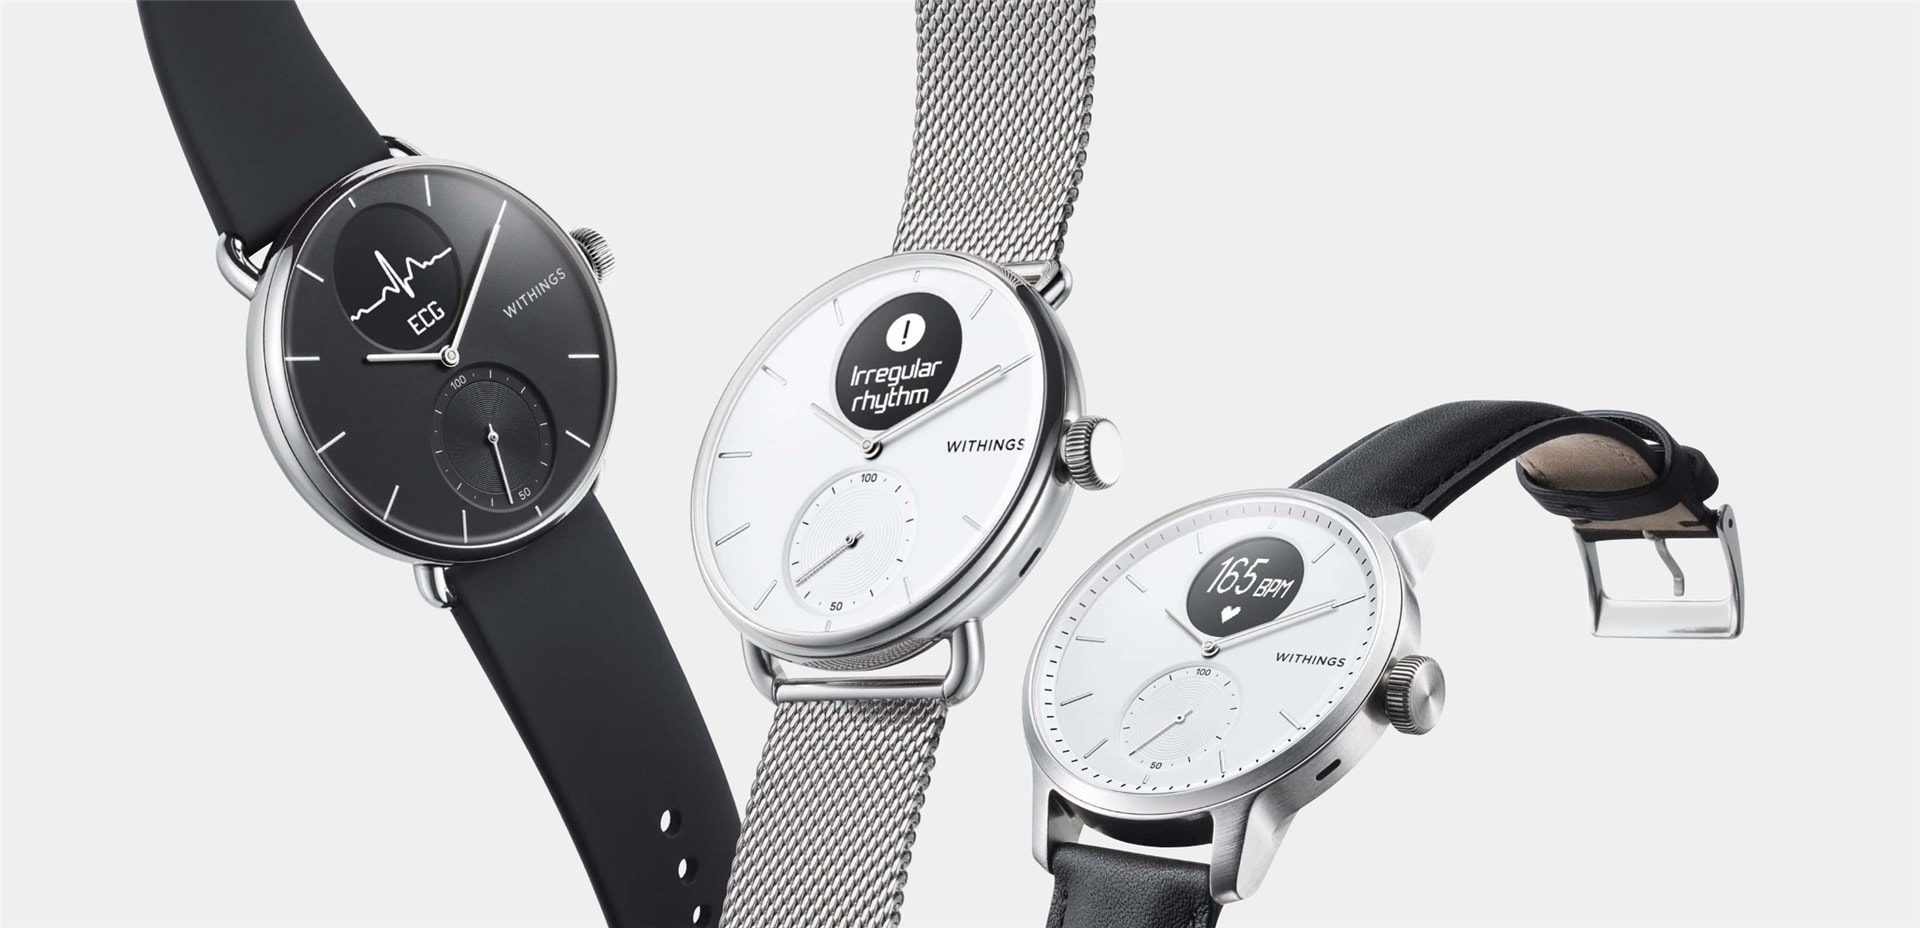 First smartwatch with medical-grade Electrocardiogram and Sleep Apnea detection from Withings